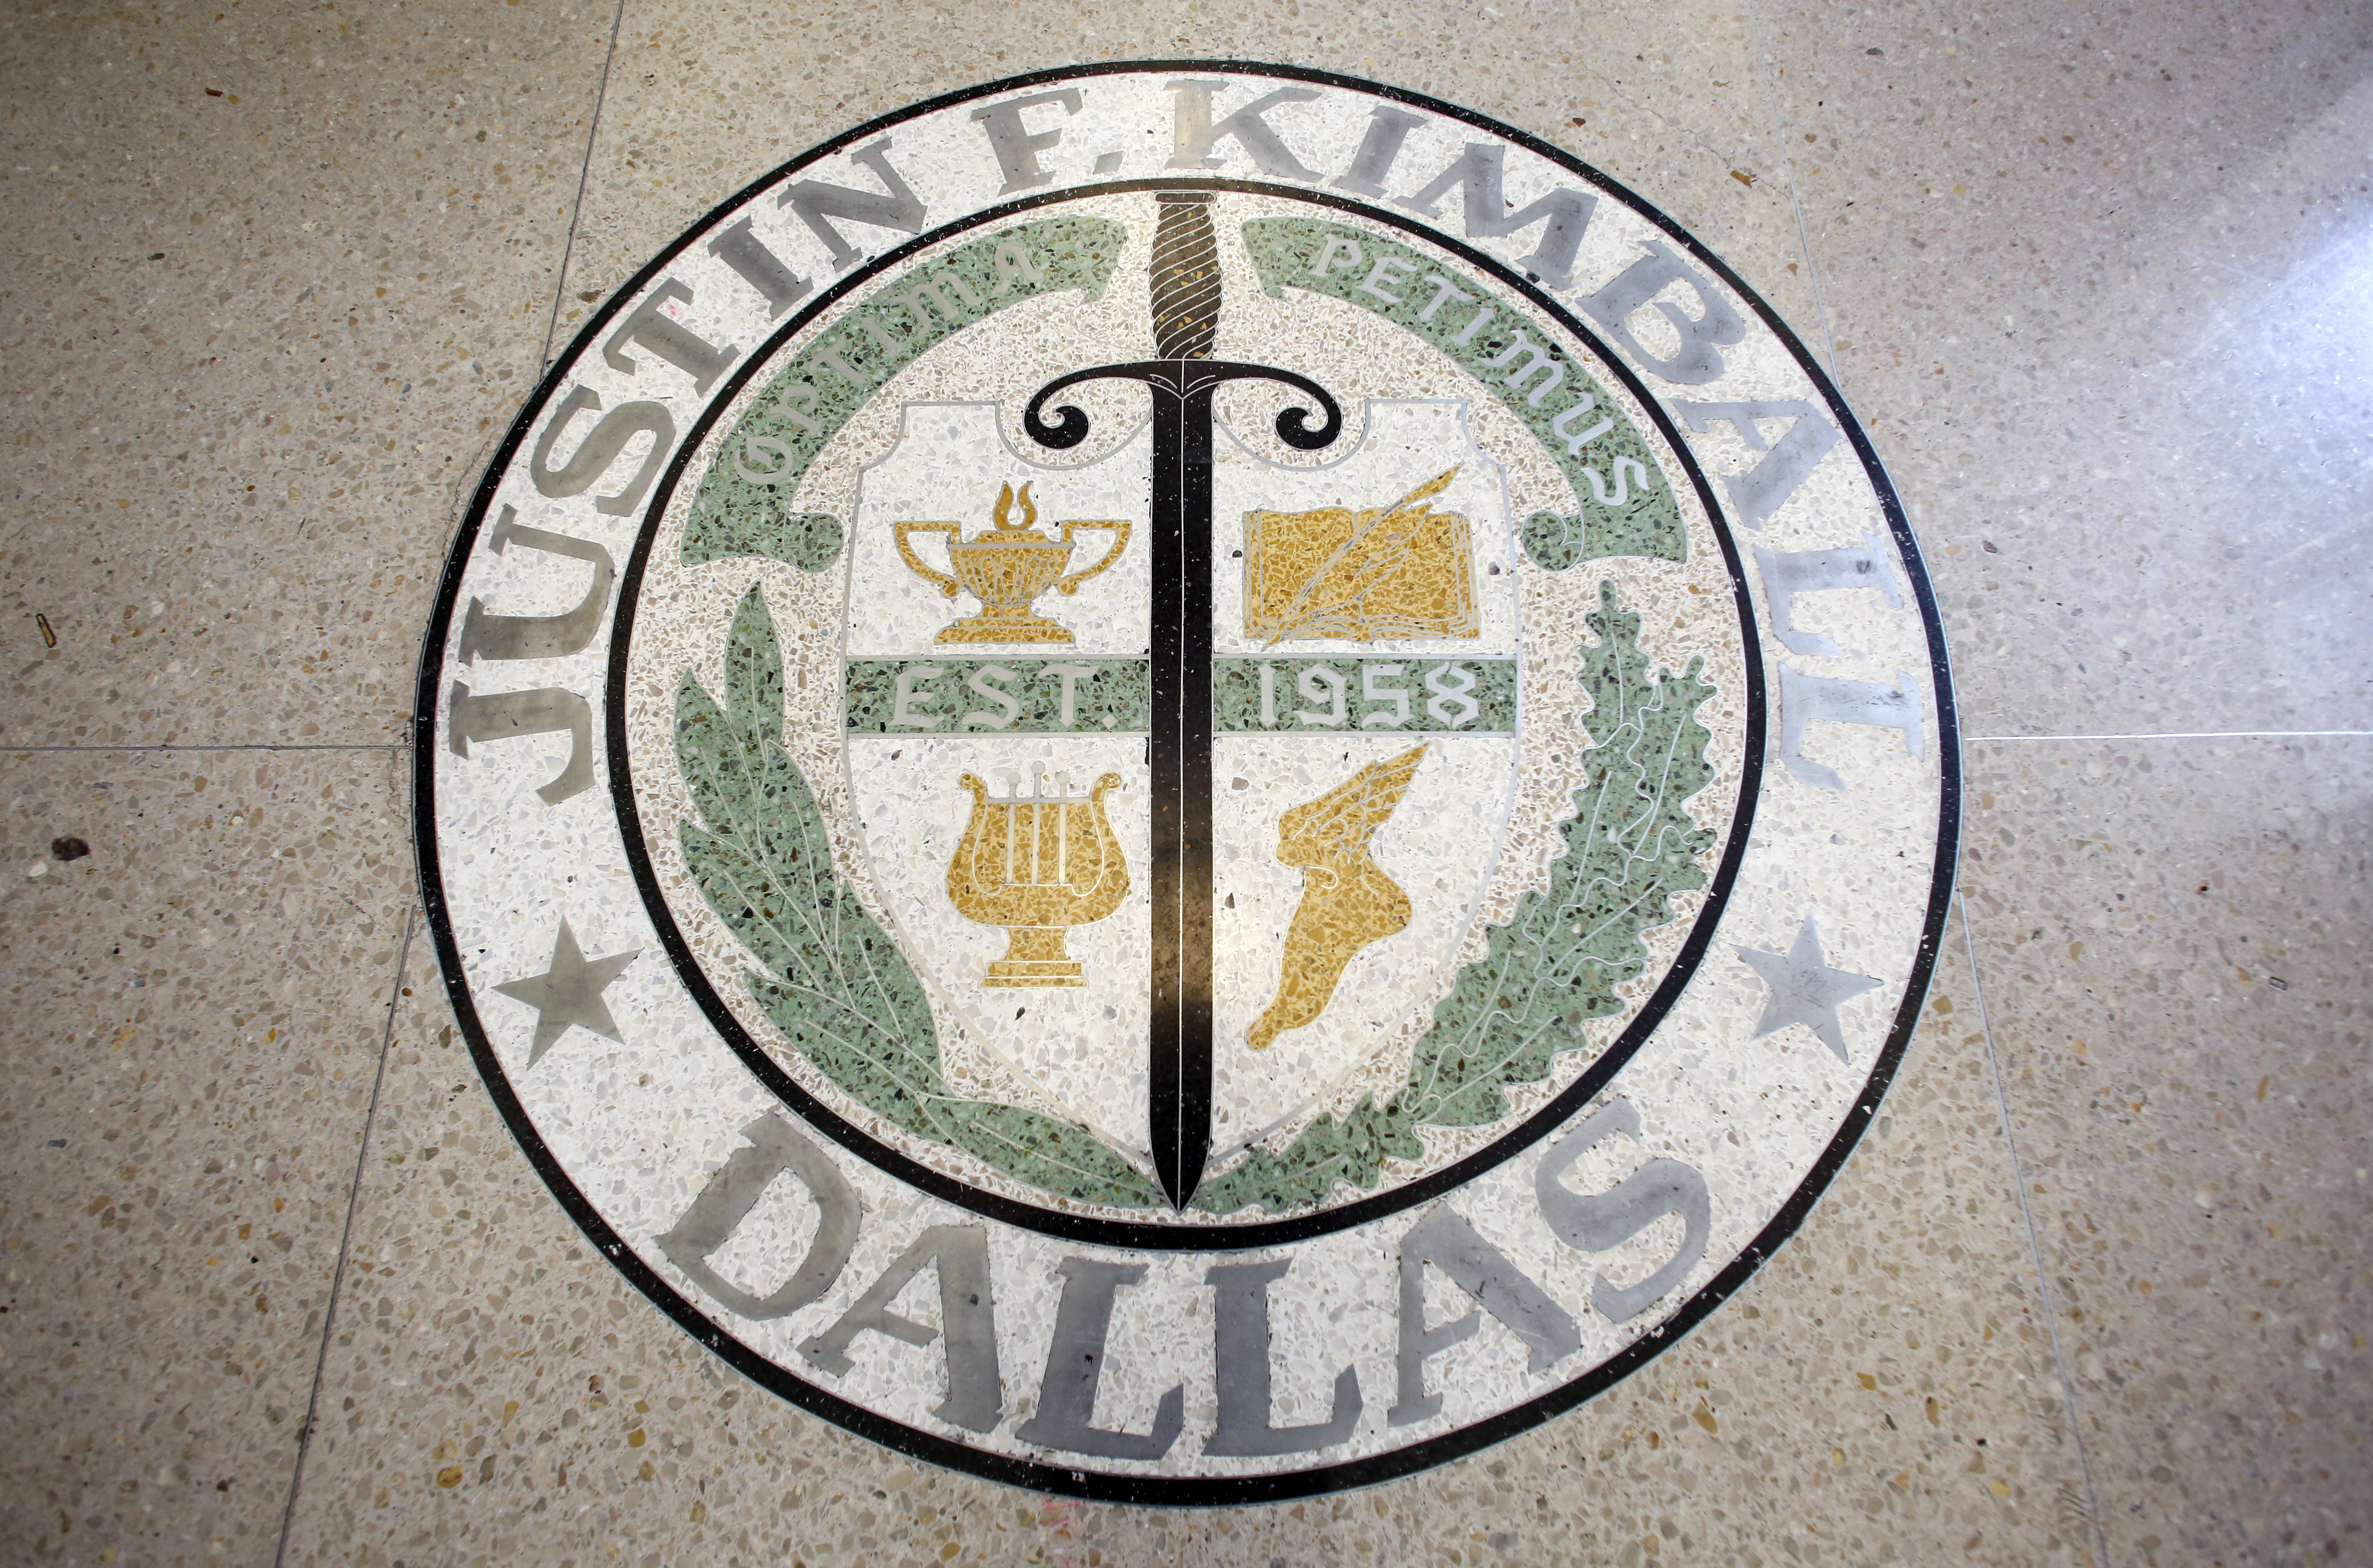 The seal in the lobby that was given to the school by Margie Horton's graduating class in 1961 at Kimball High School in Dallas. Photographed on Friday, January 20, 2017. (photo © Lara Solt)